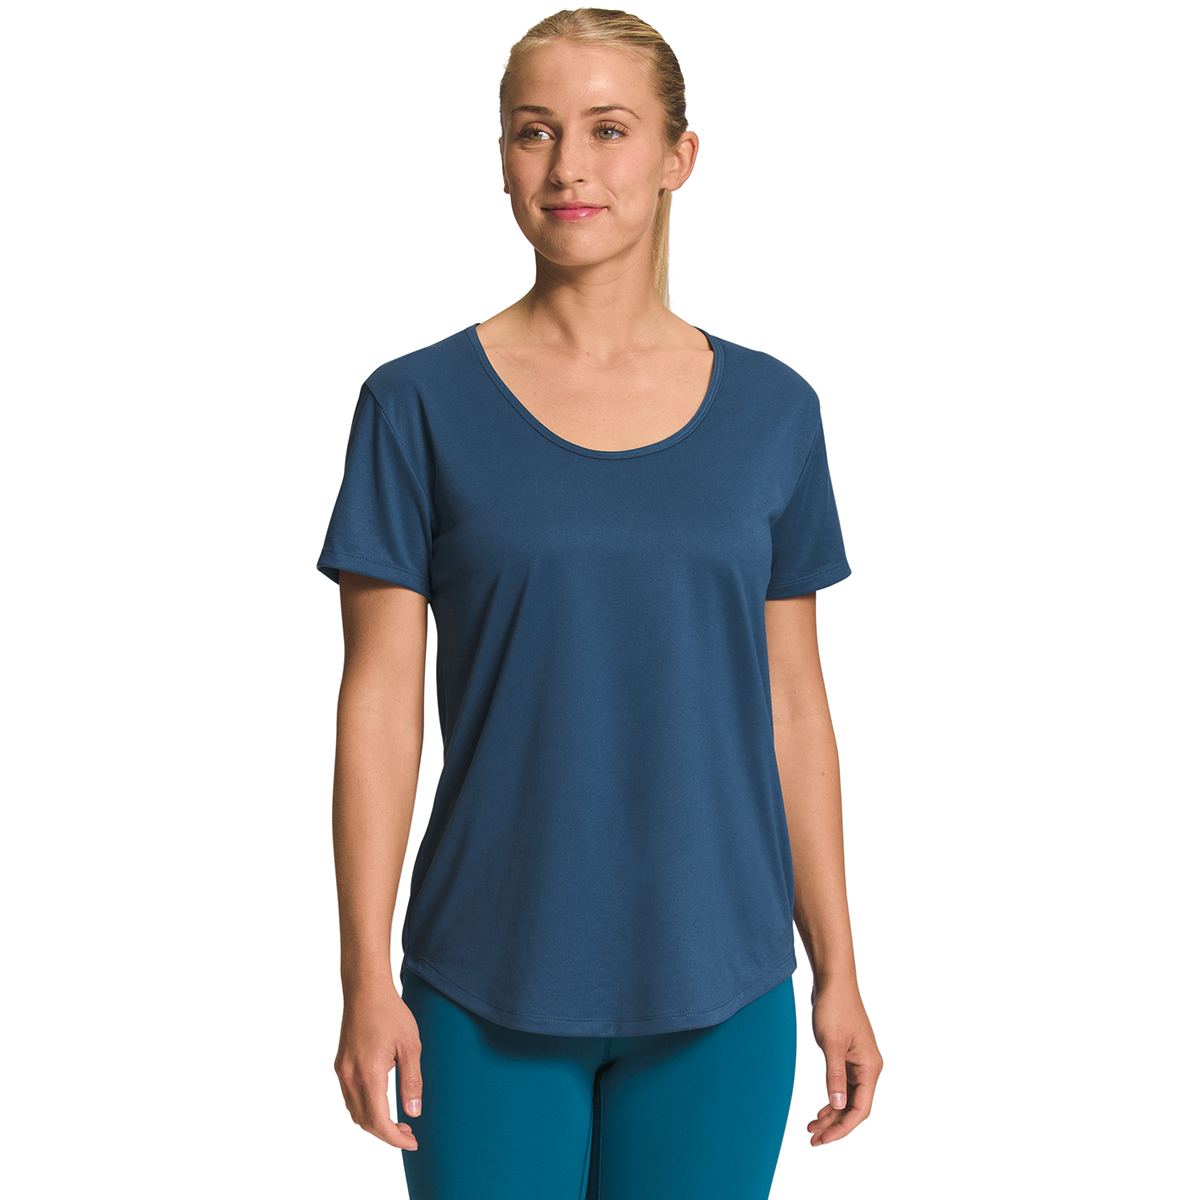 The North Face Women's Elevation Life Short-Sleeve Tee - Size XL